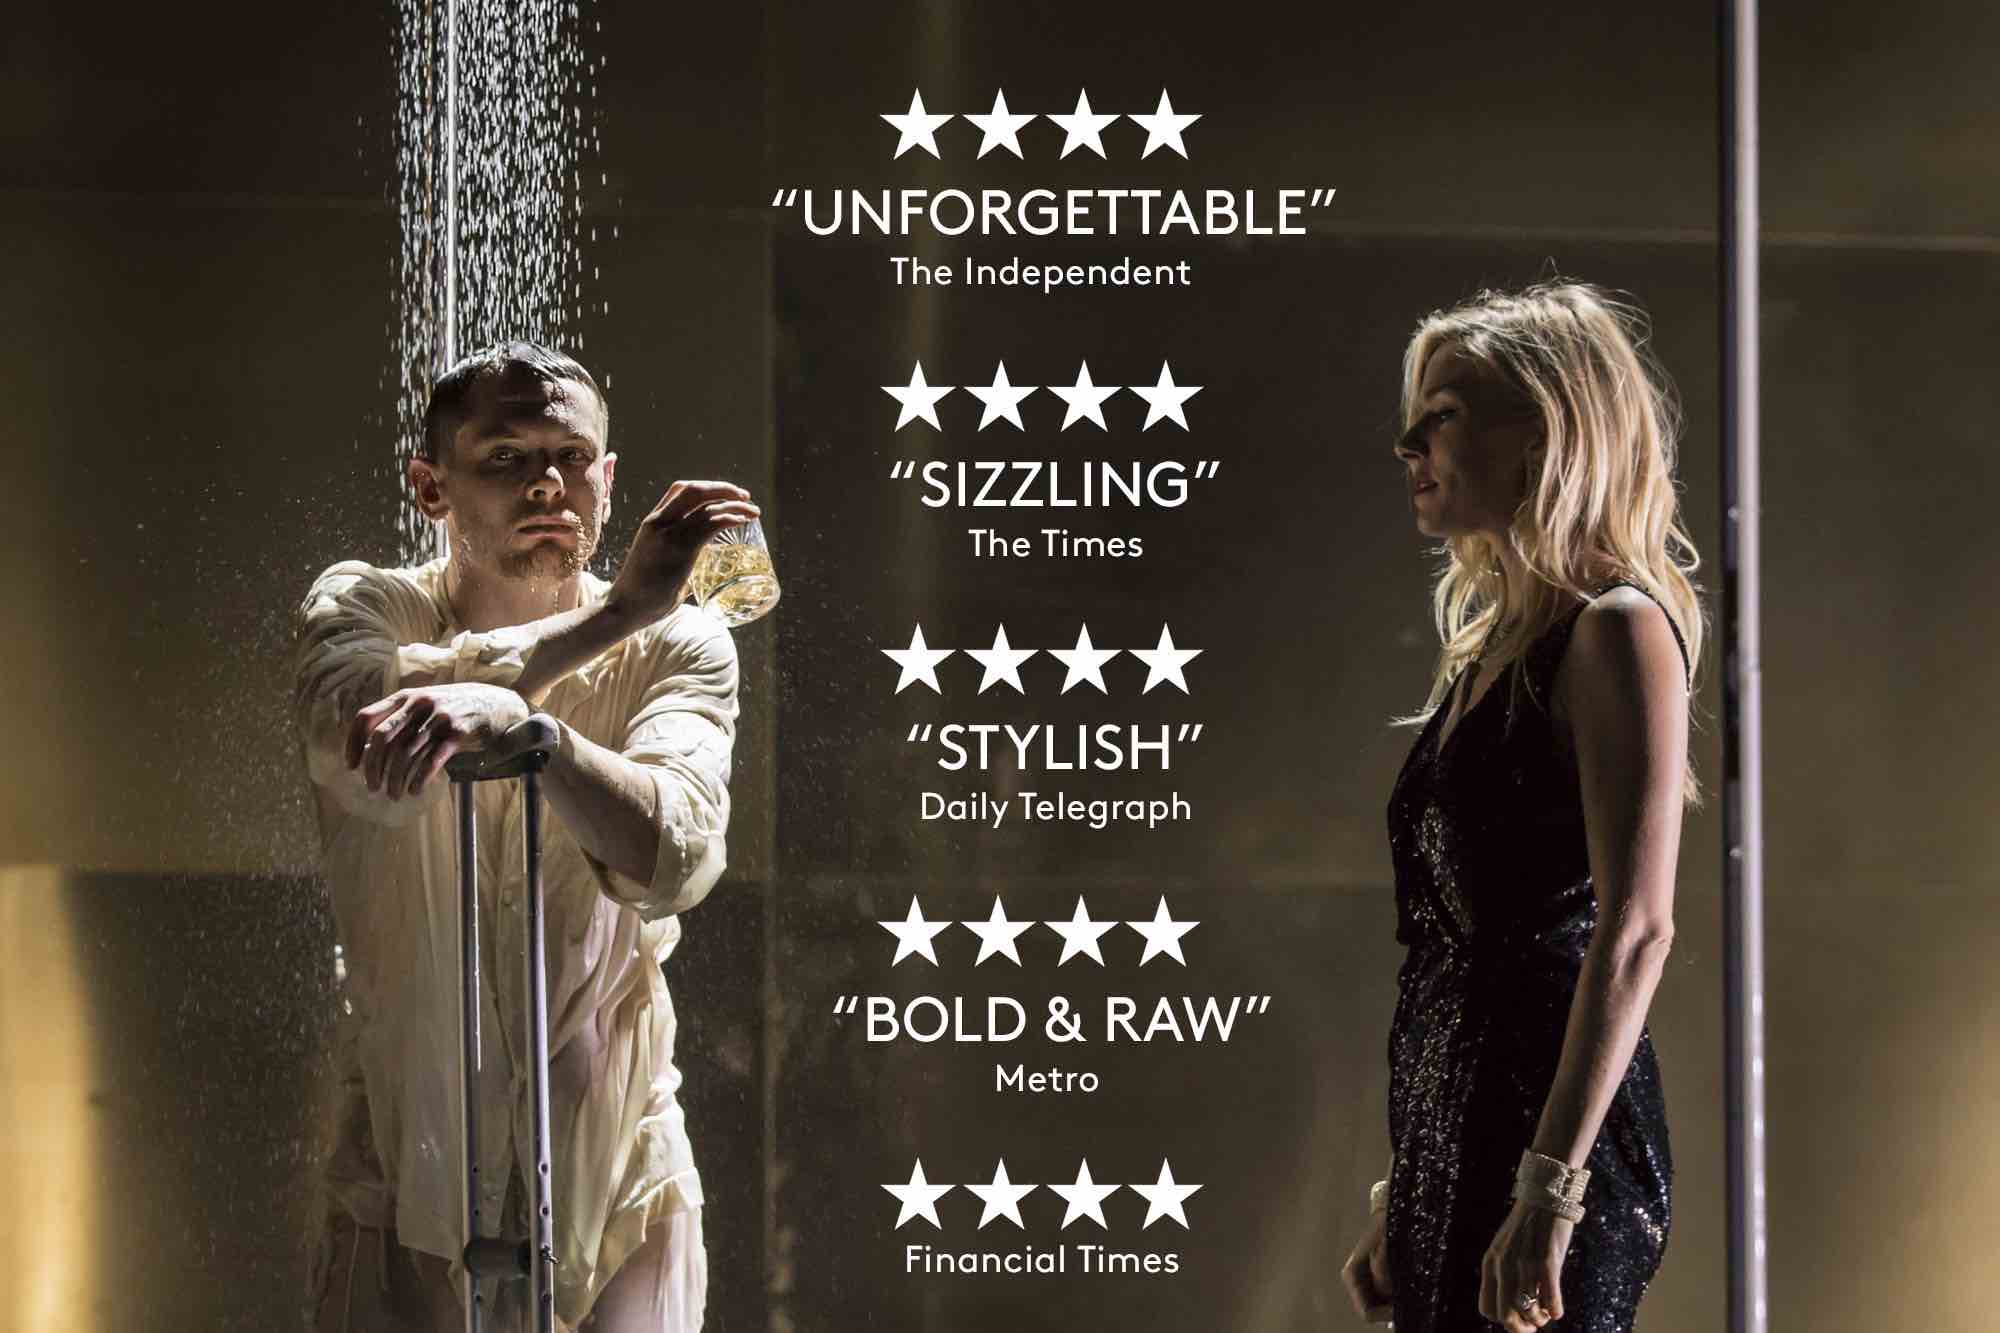 Jack O'Connell (Brick) and Sienna Miller (Maggie) in a scene from Cat on a Hot Tin Roof with four star reviews included on the image.